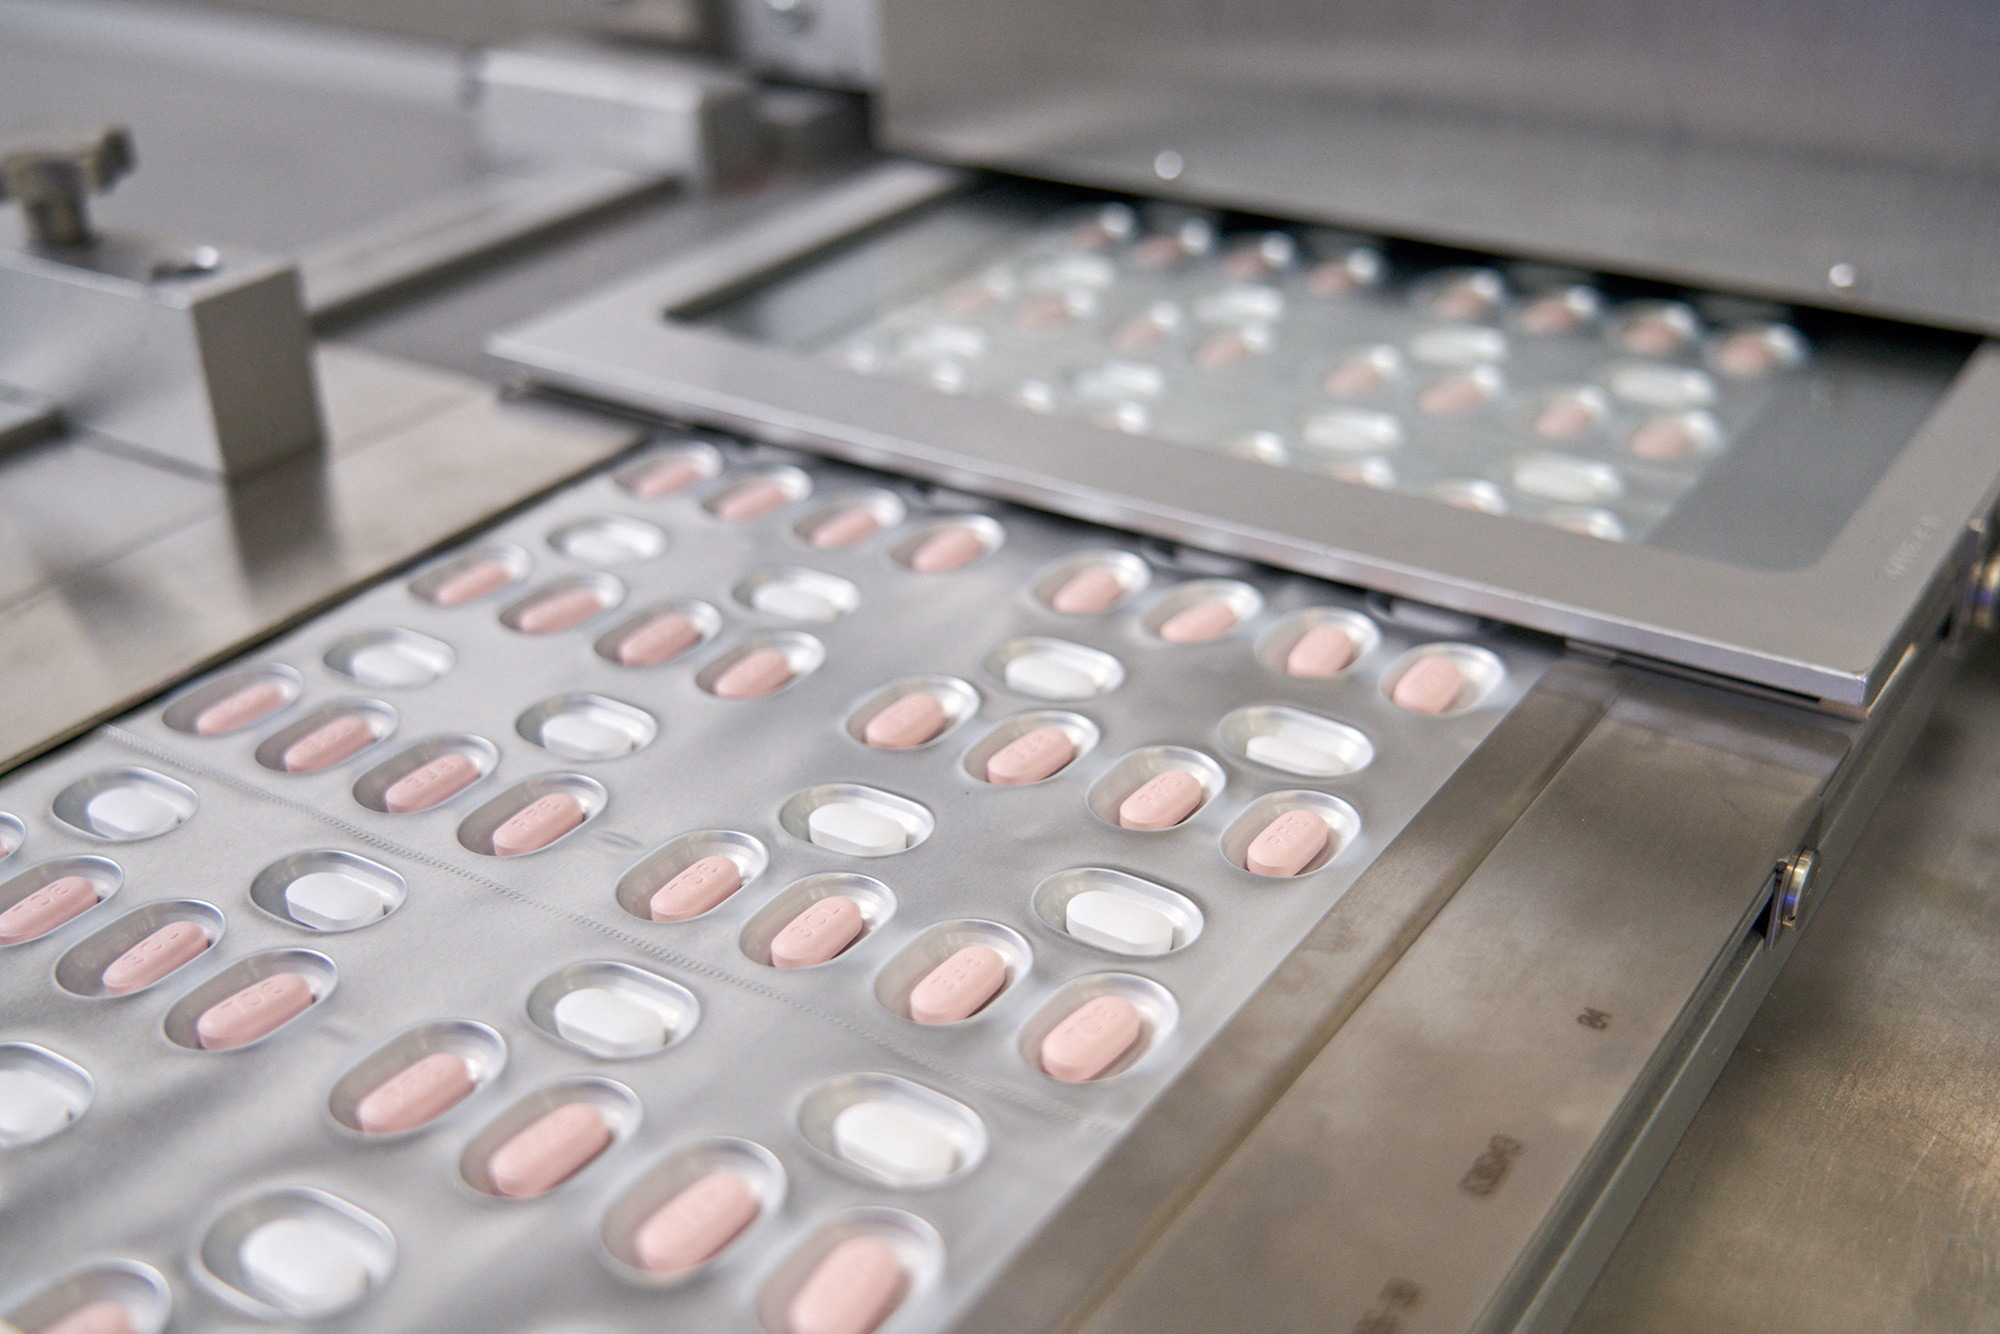 Paxlovid, Pfizer's Covid-19 pill, is seen manufactured in Ascoli, Italy, in this undated handout photo obtained by Reuters on November 16.